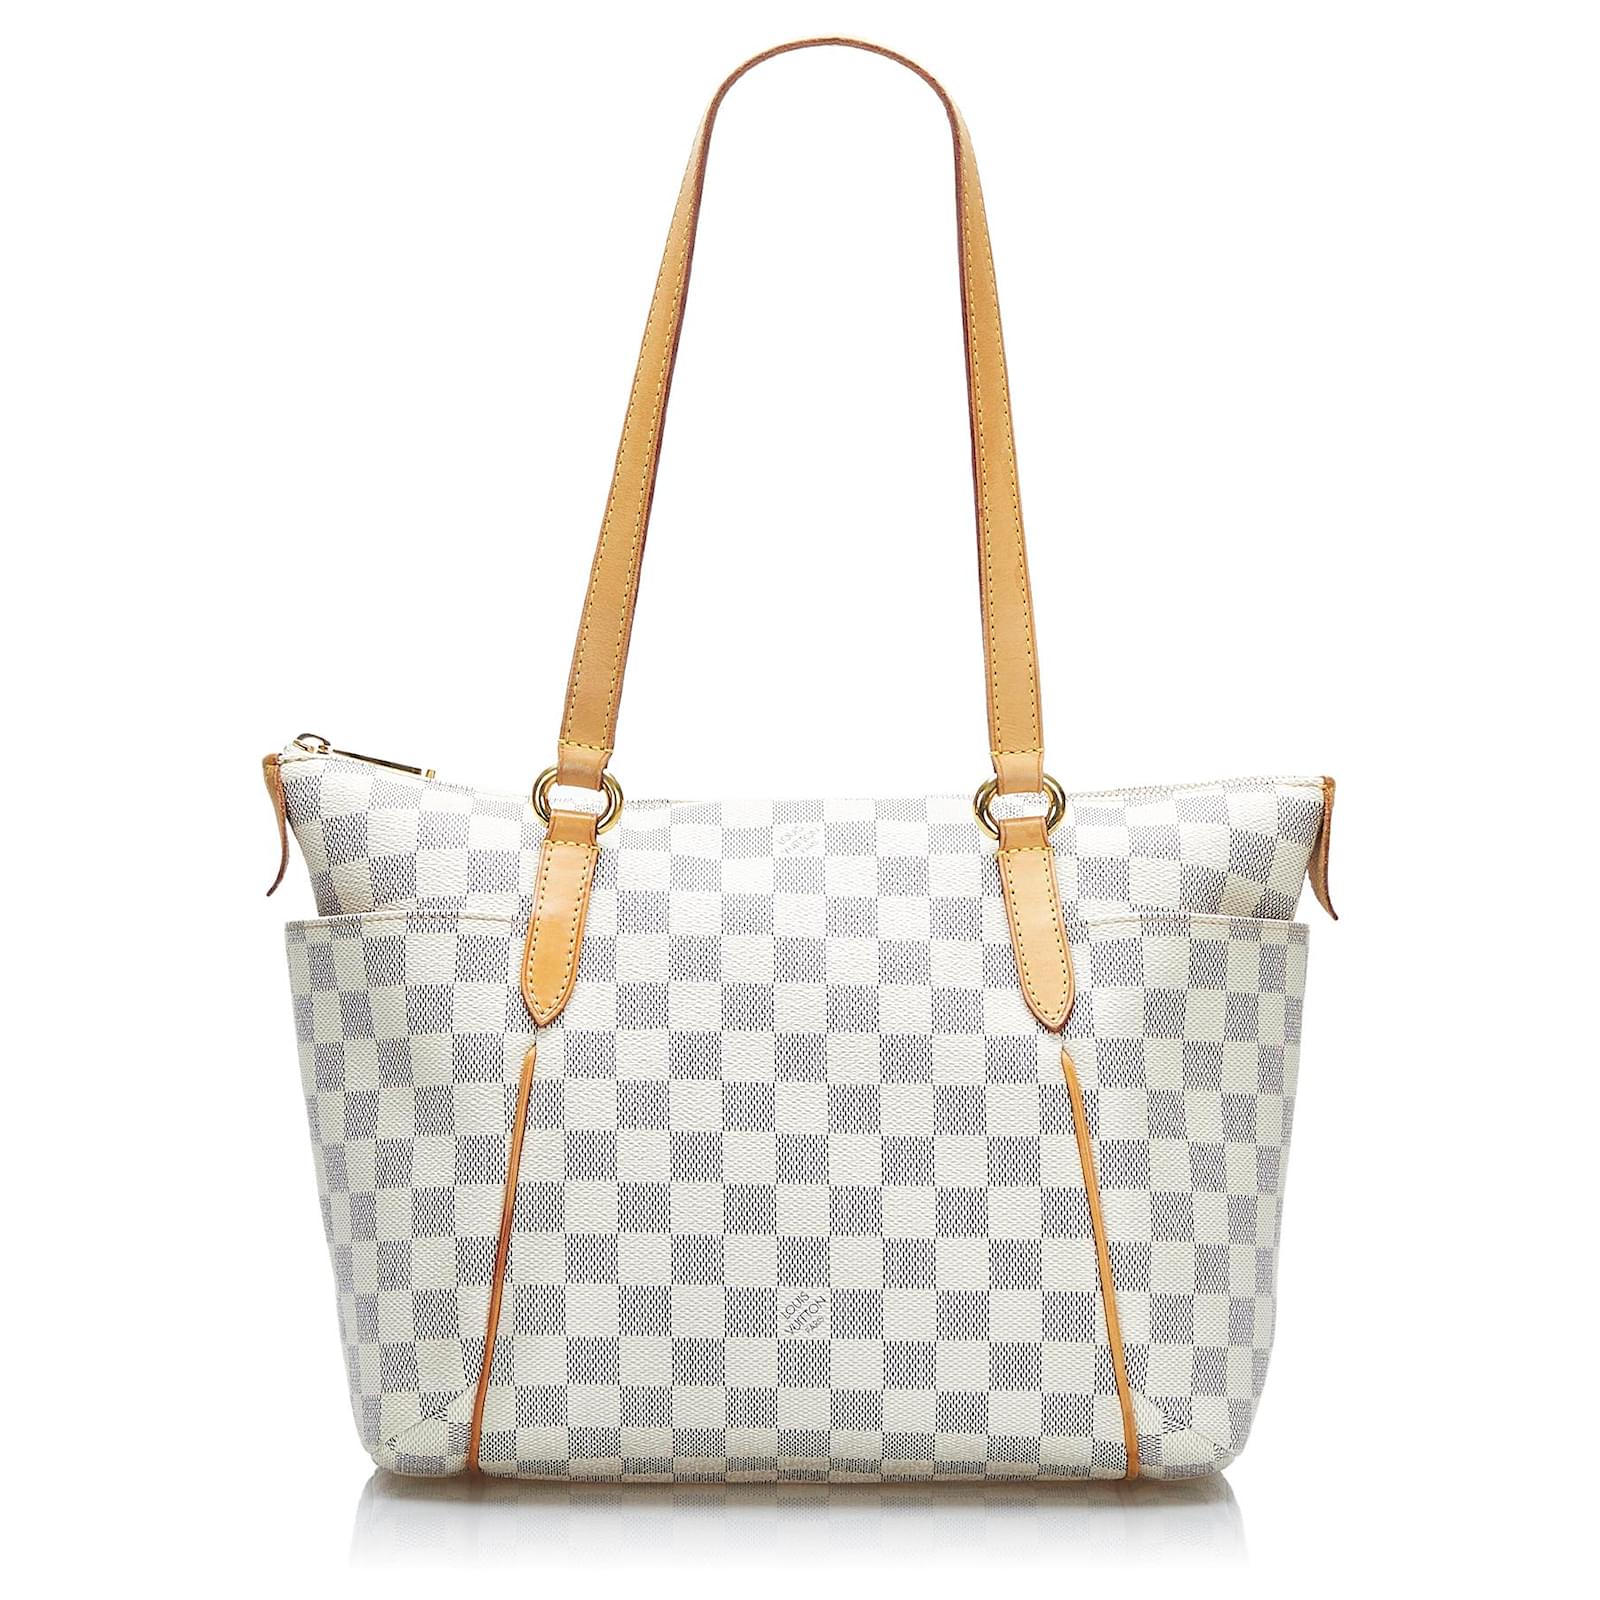 Louis Vuitton Damier Azur Canvas Leather Totally Pm Tote Bag in Black